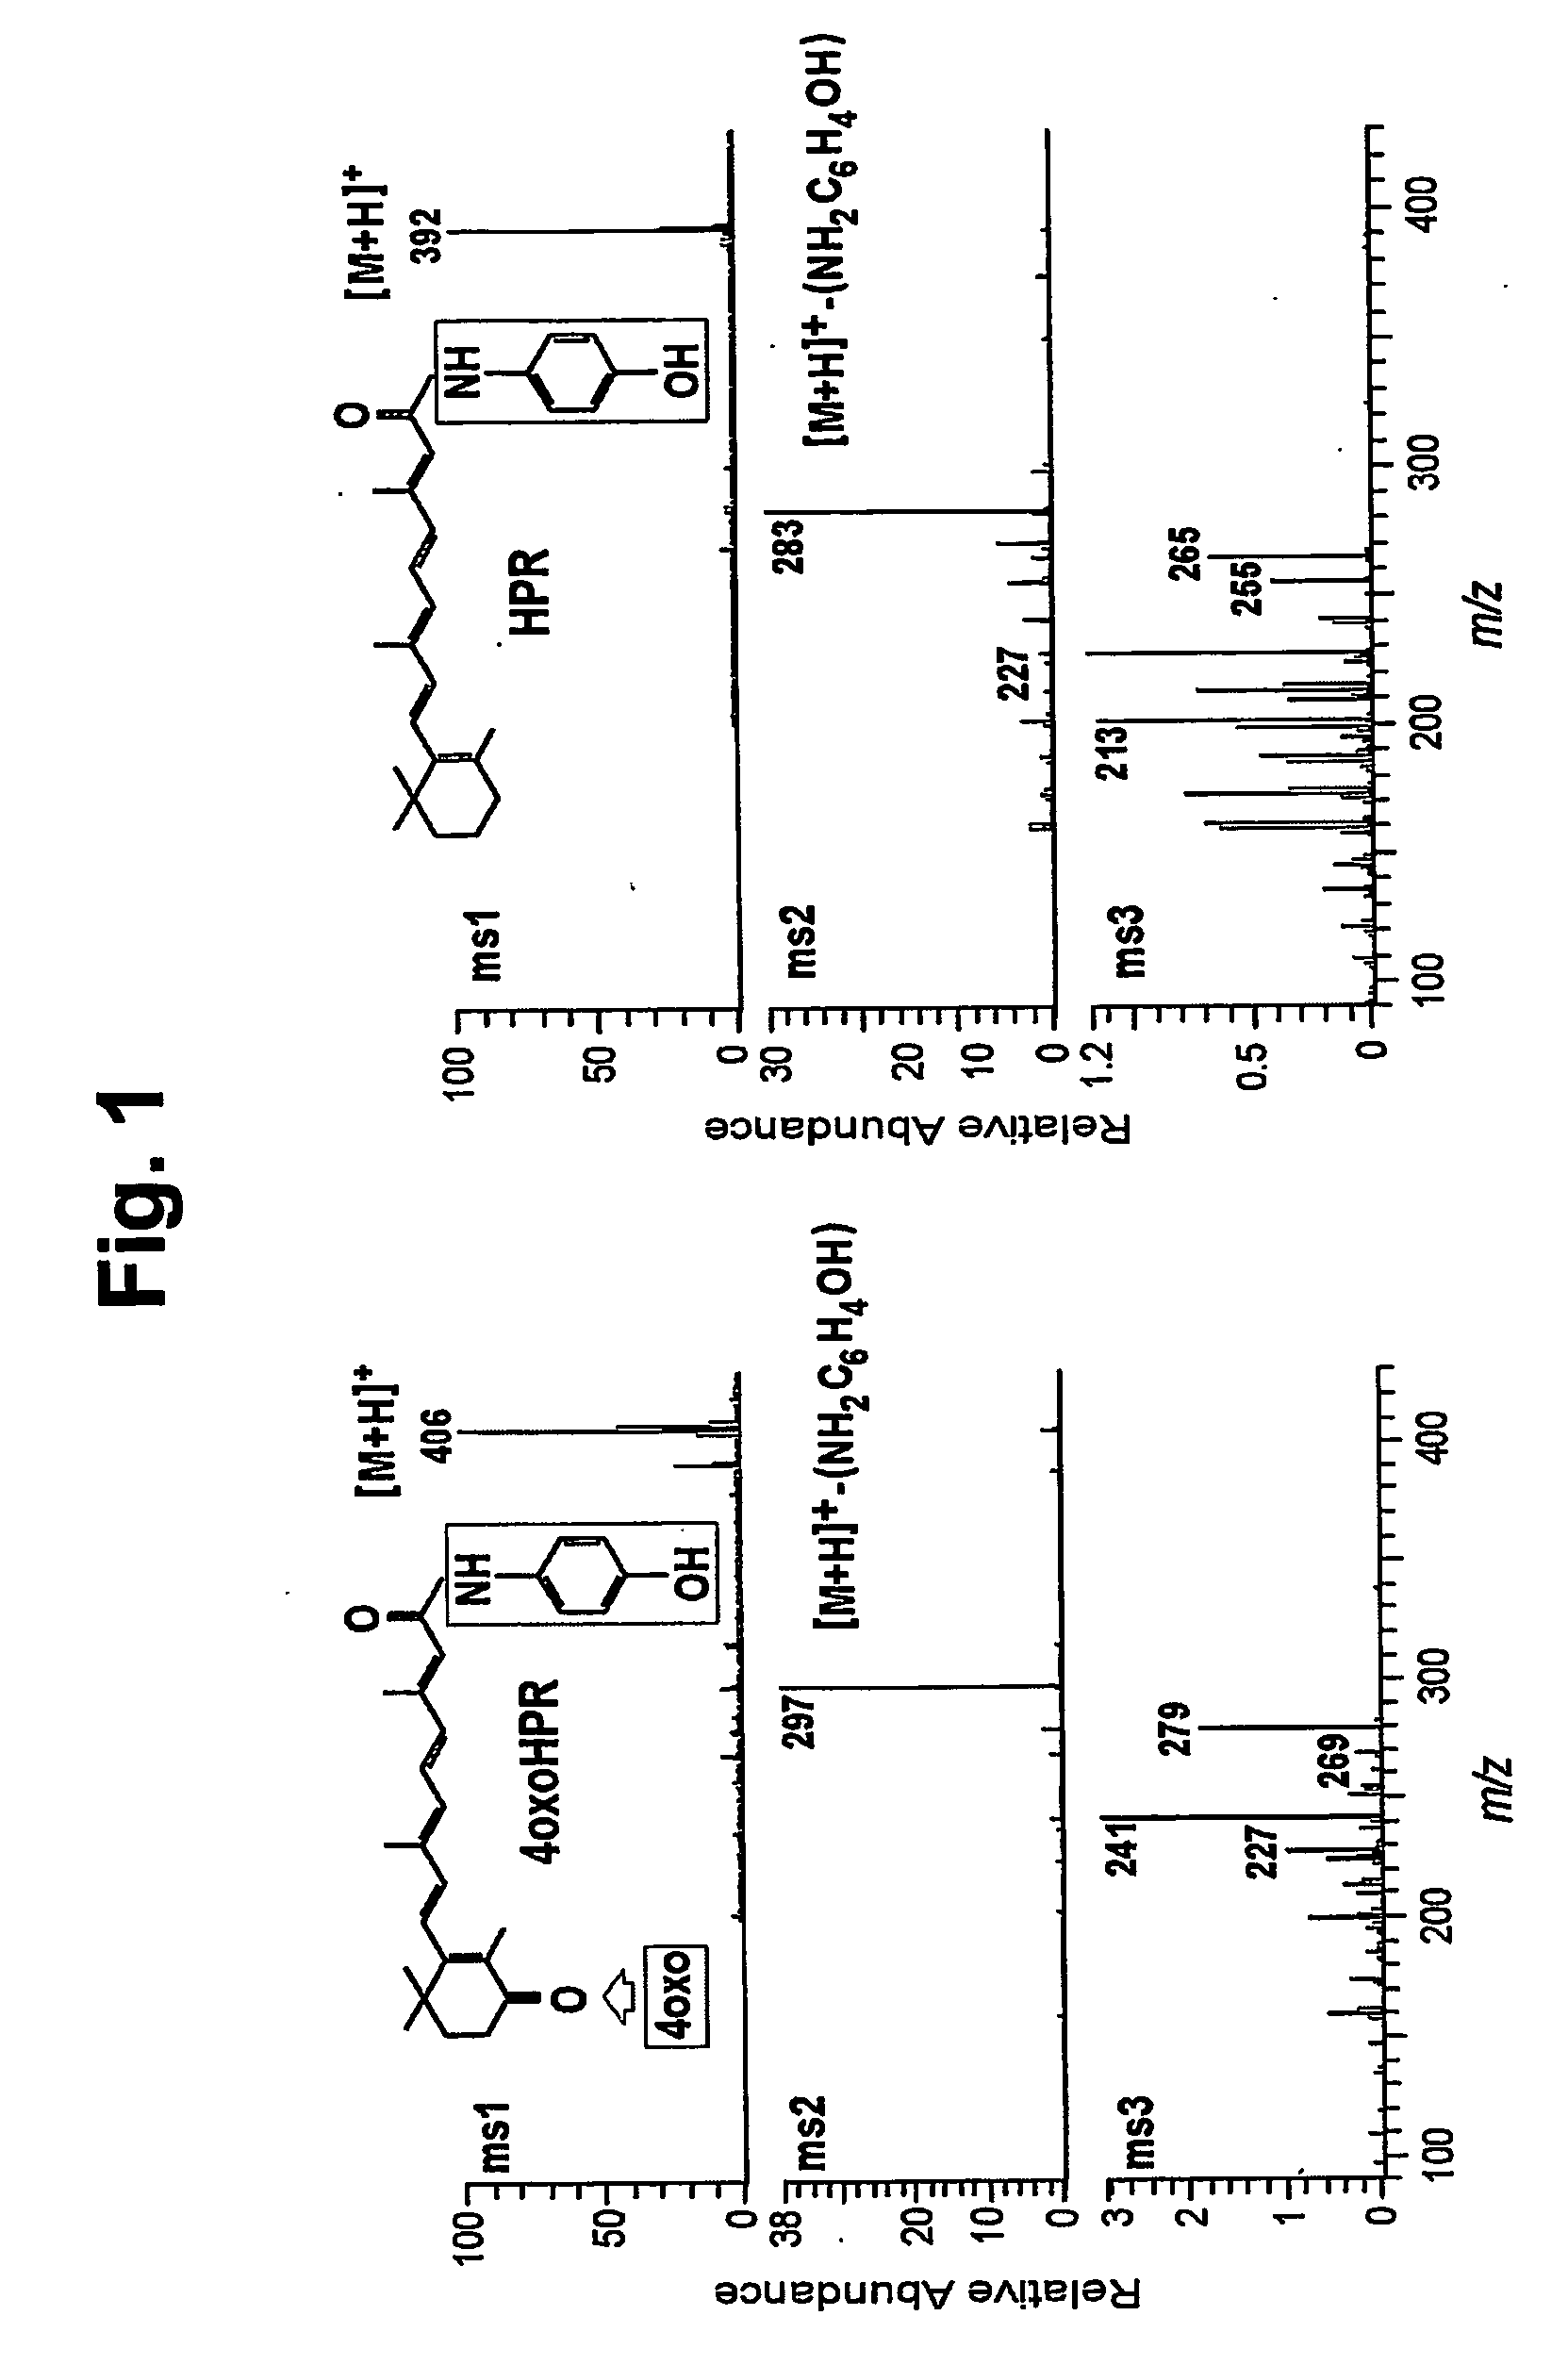 4-oxo-fenretinide, administered alone and in combination with fenretinide, as preventive and therapeutic agent for cancer